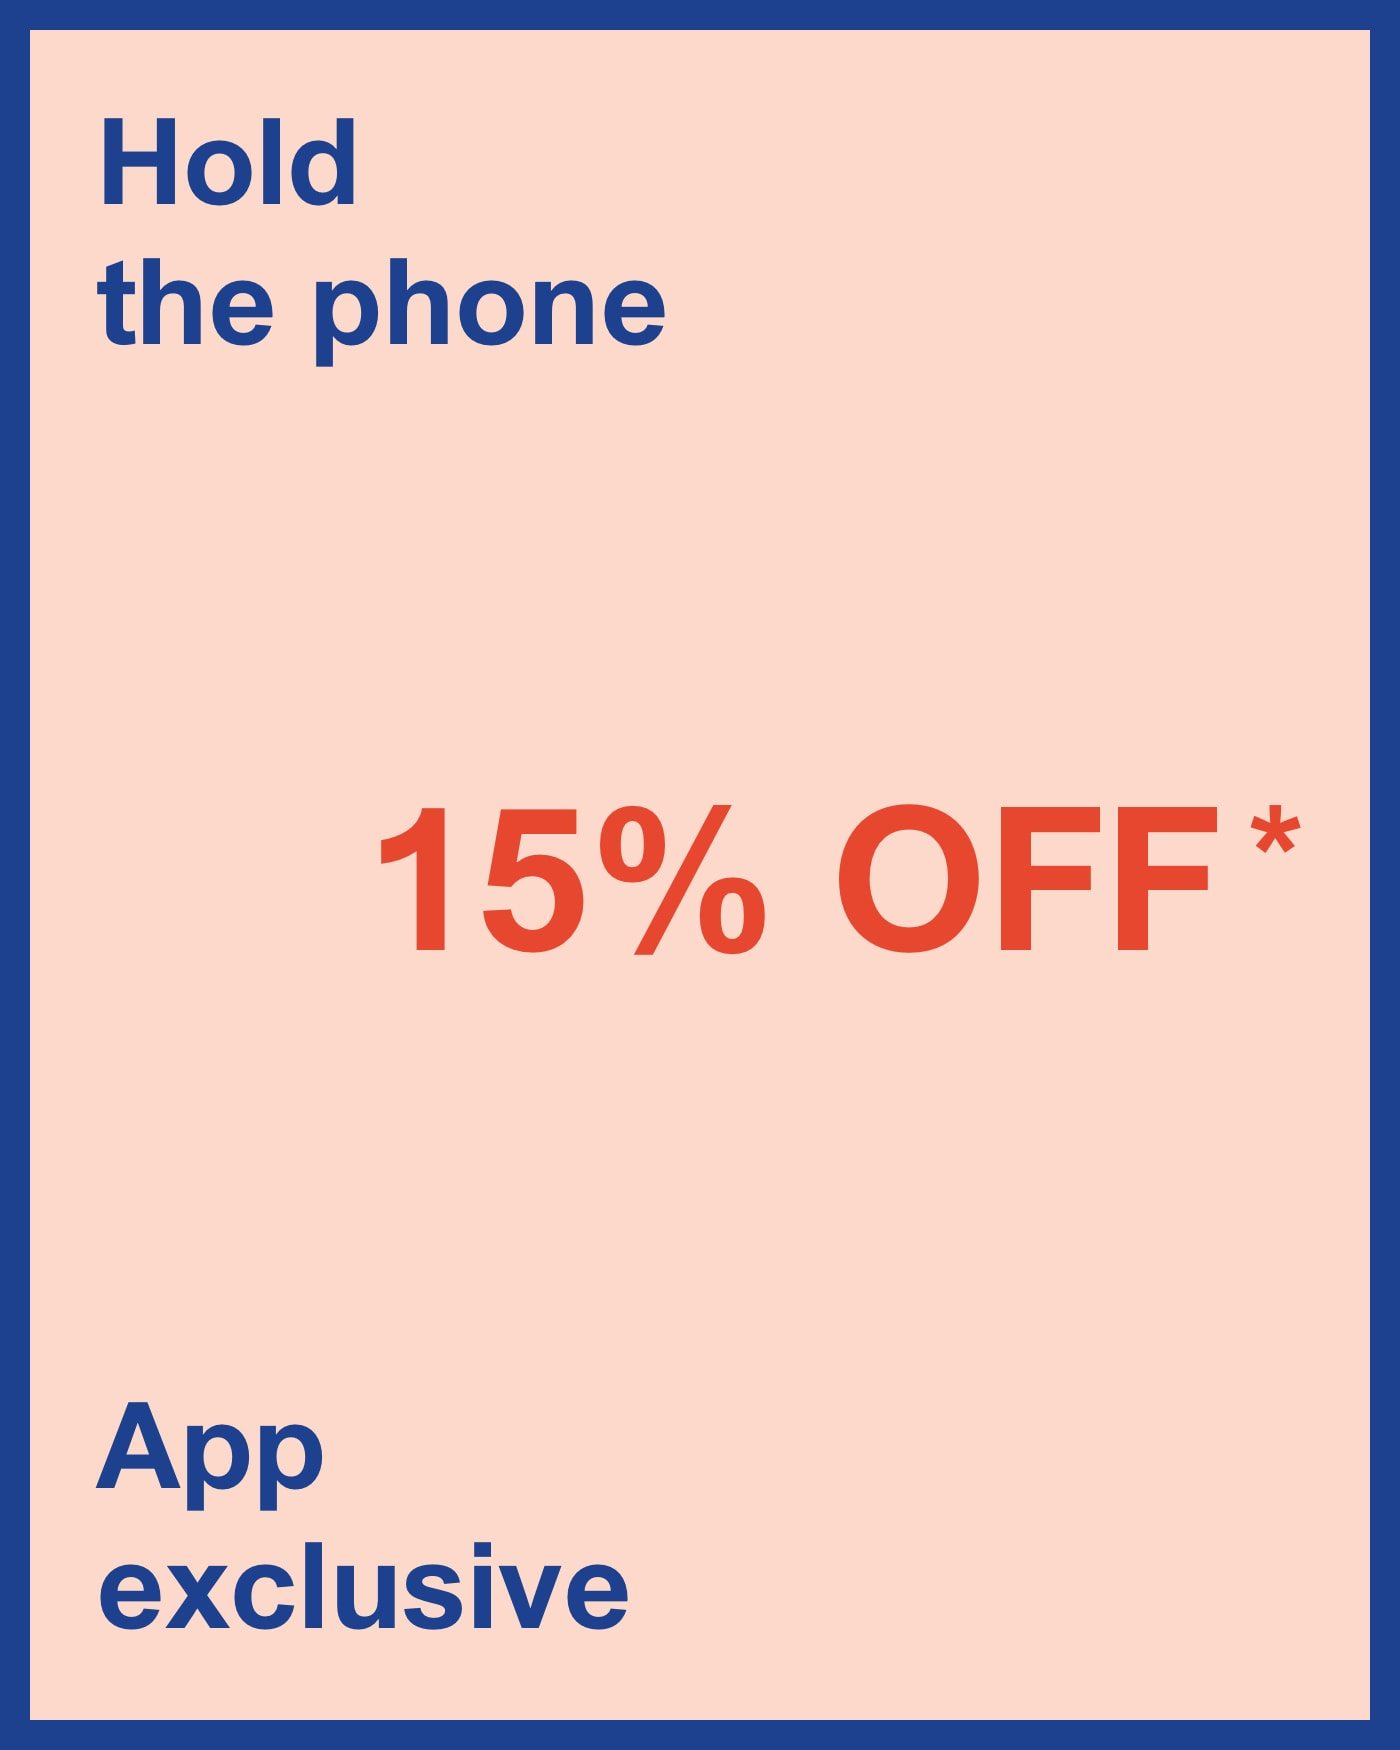 Hold the phone - 15% OFF* - App exclusive